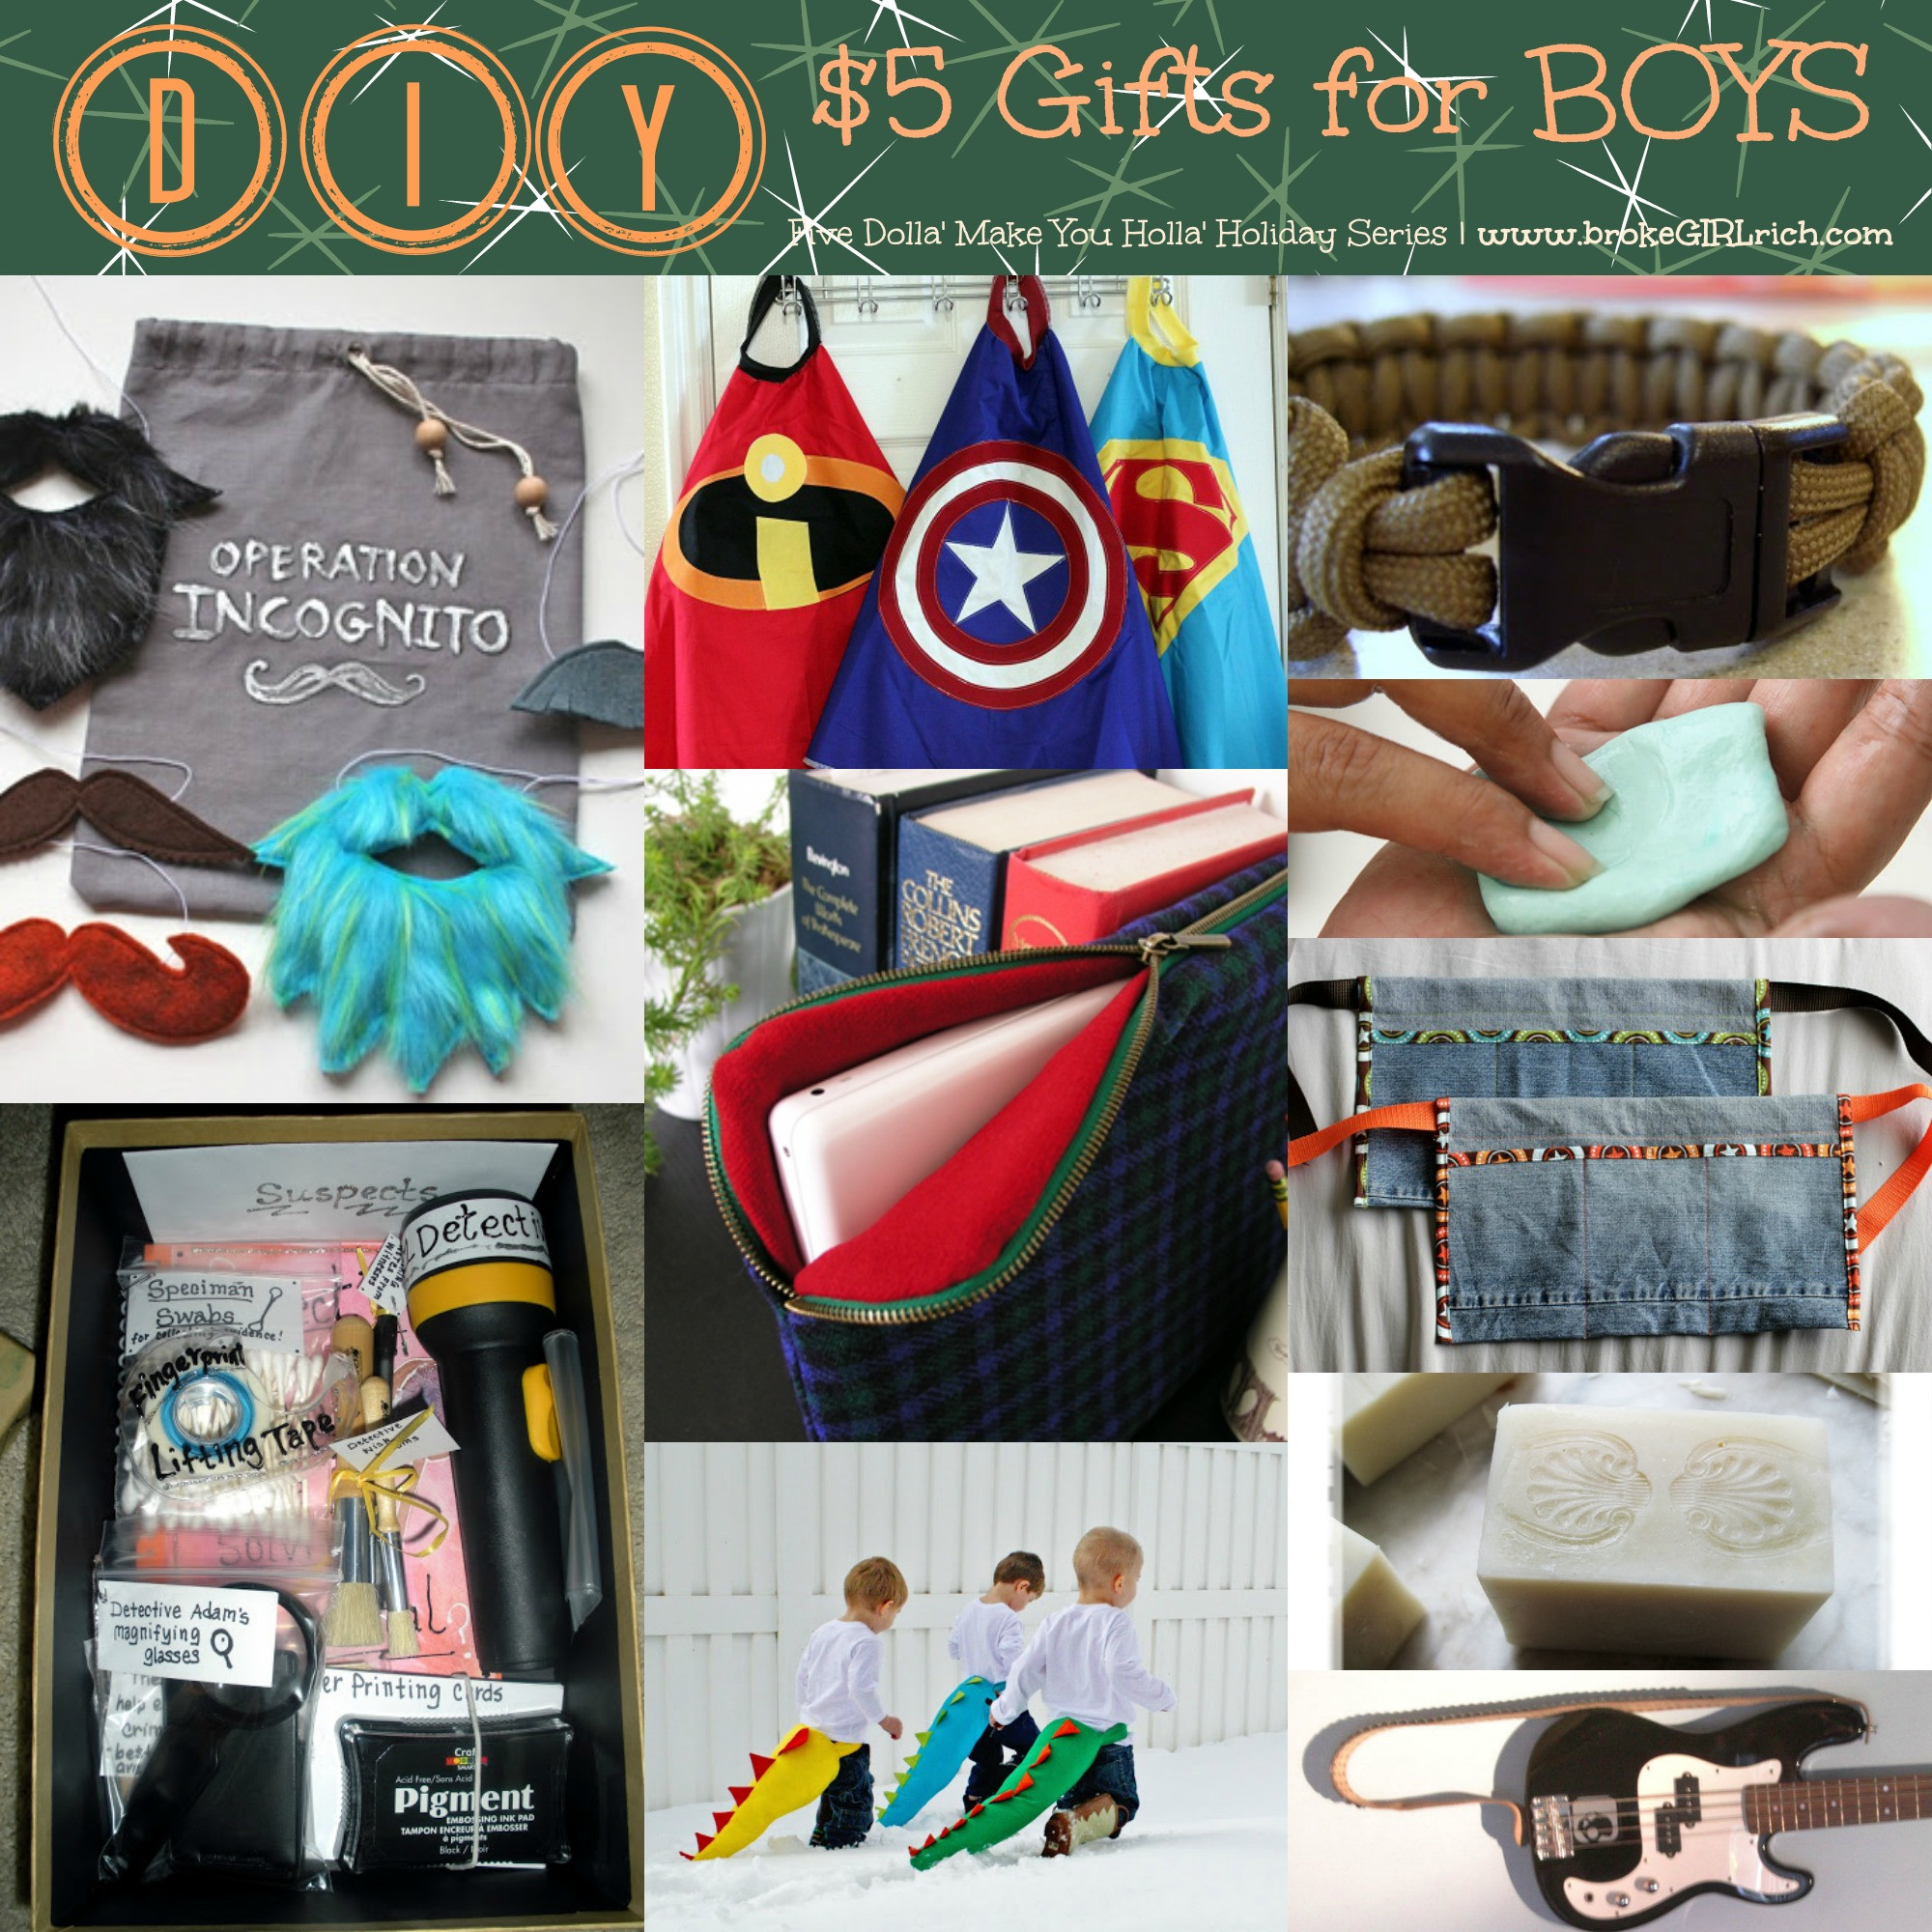 DIY Christmas Gifts For Brothers
 Five Dolla Make You Holla Holiday Series Brothers